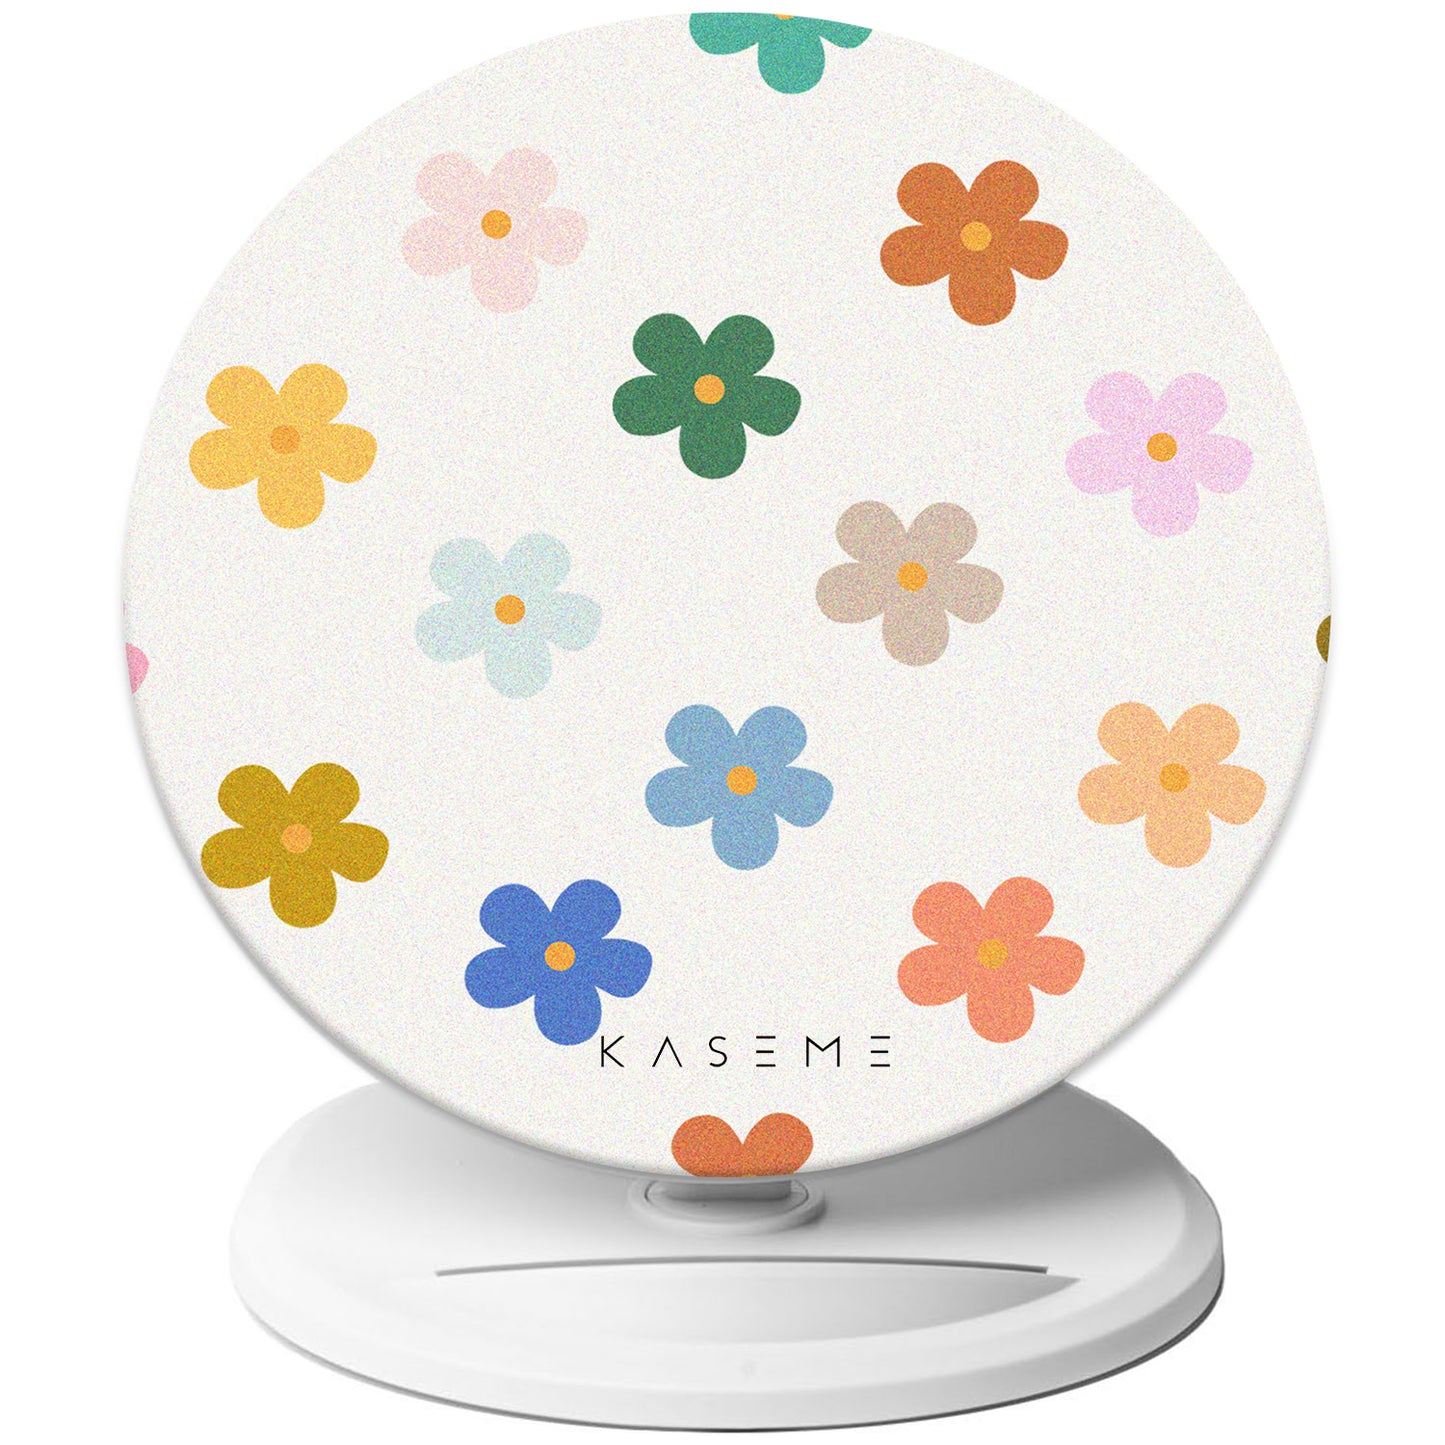 Woodstock wireless charger